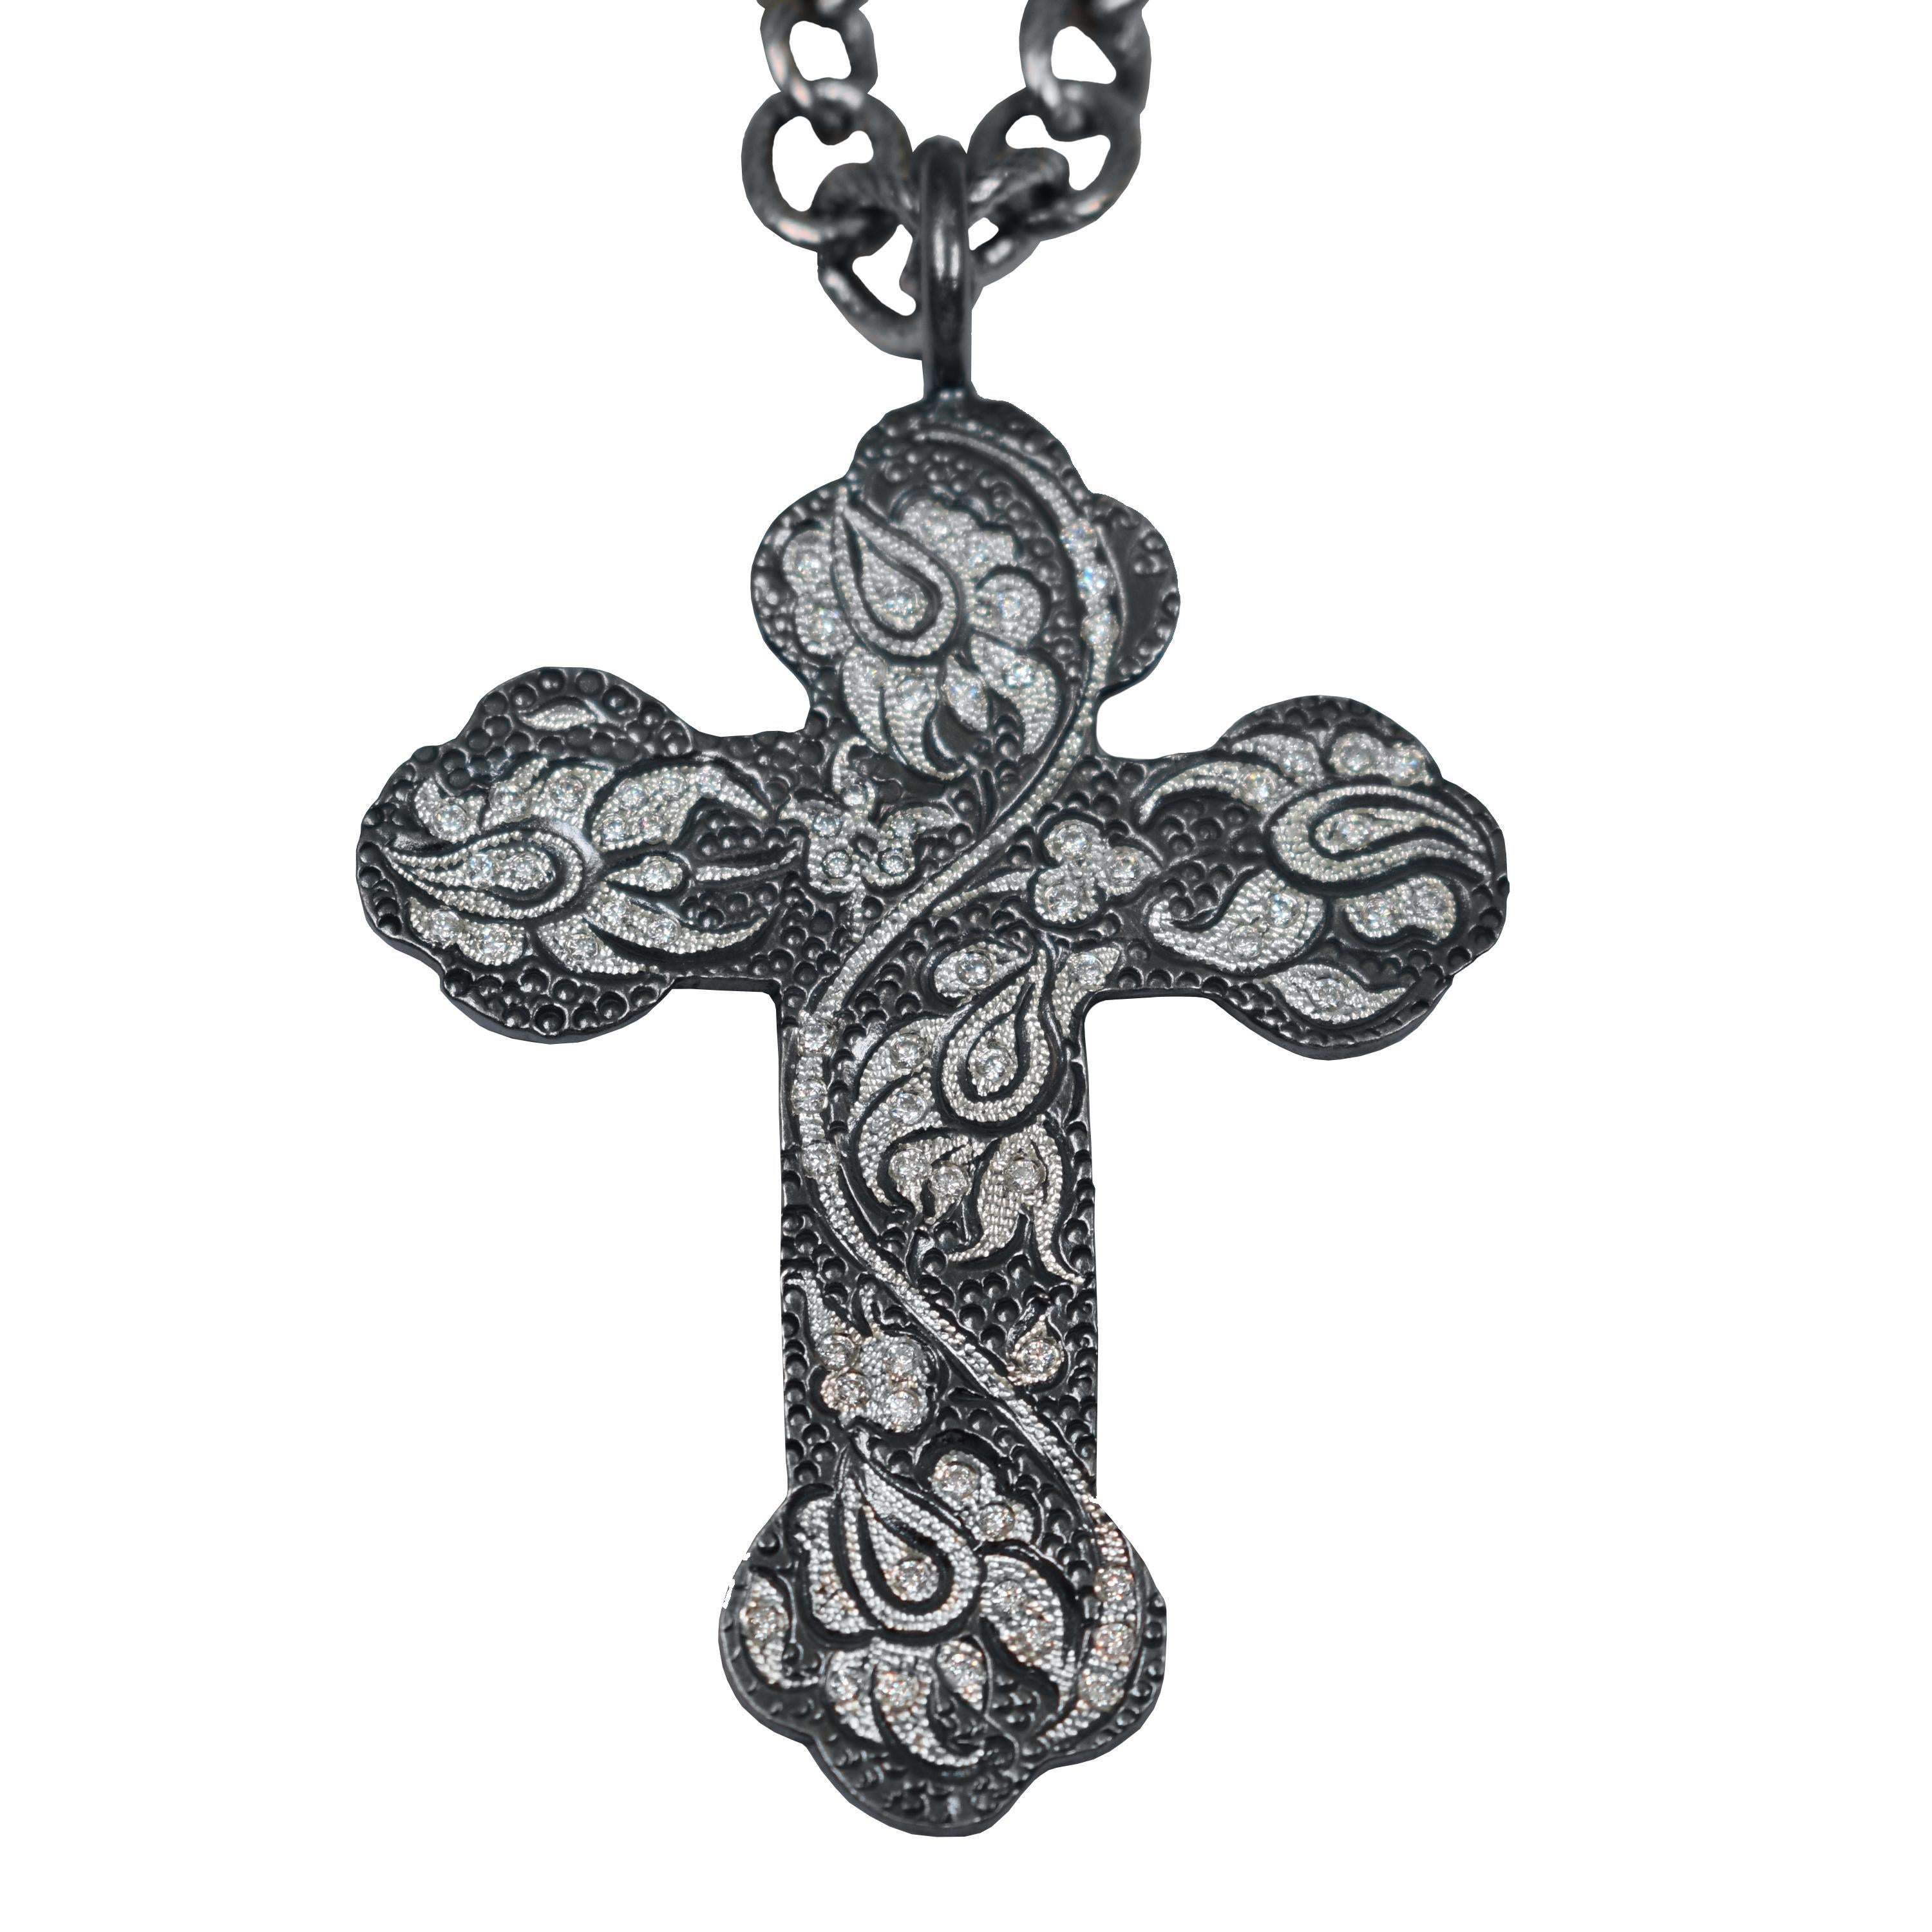 Diamond pavé (0.75 carats, G-H, SI1) engraved oxidized sterling silver cross pendant on 21.5 inch oxidized sterling silver chain. Pendant is 2.31 inches in length.